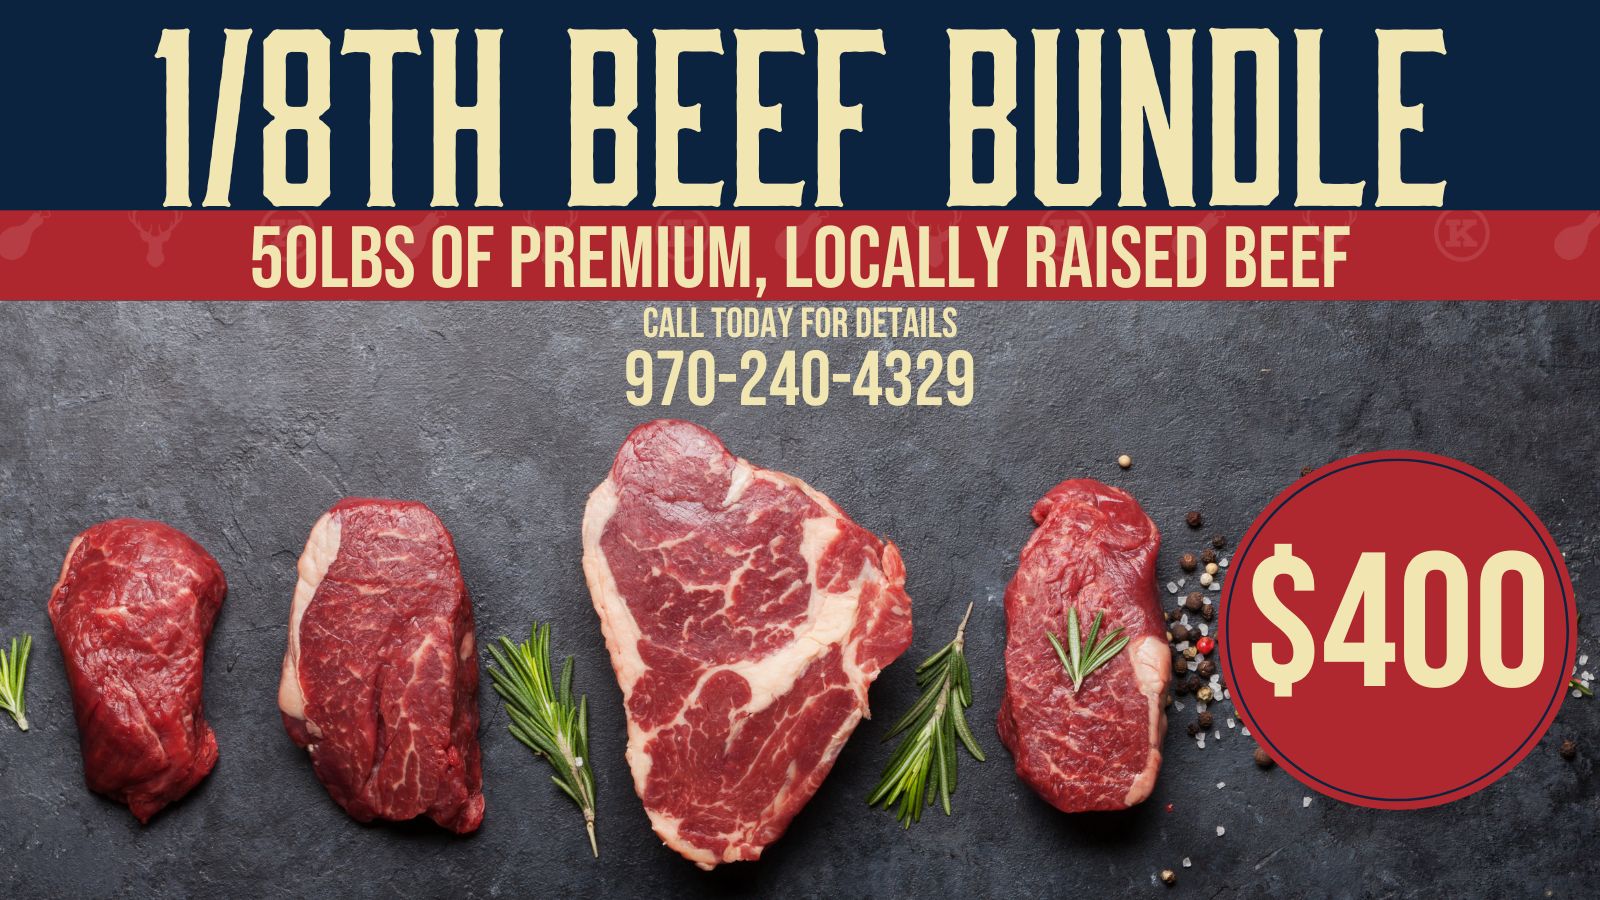 1/8th Beef Bundle graphic